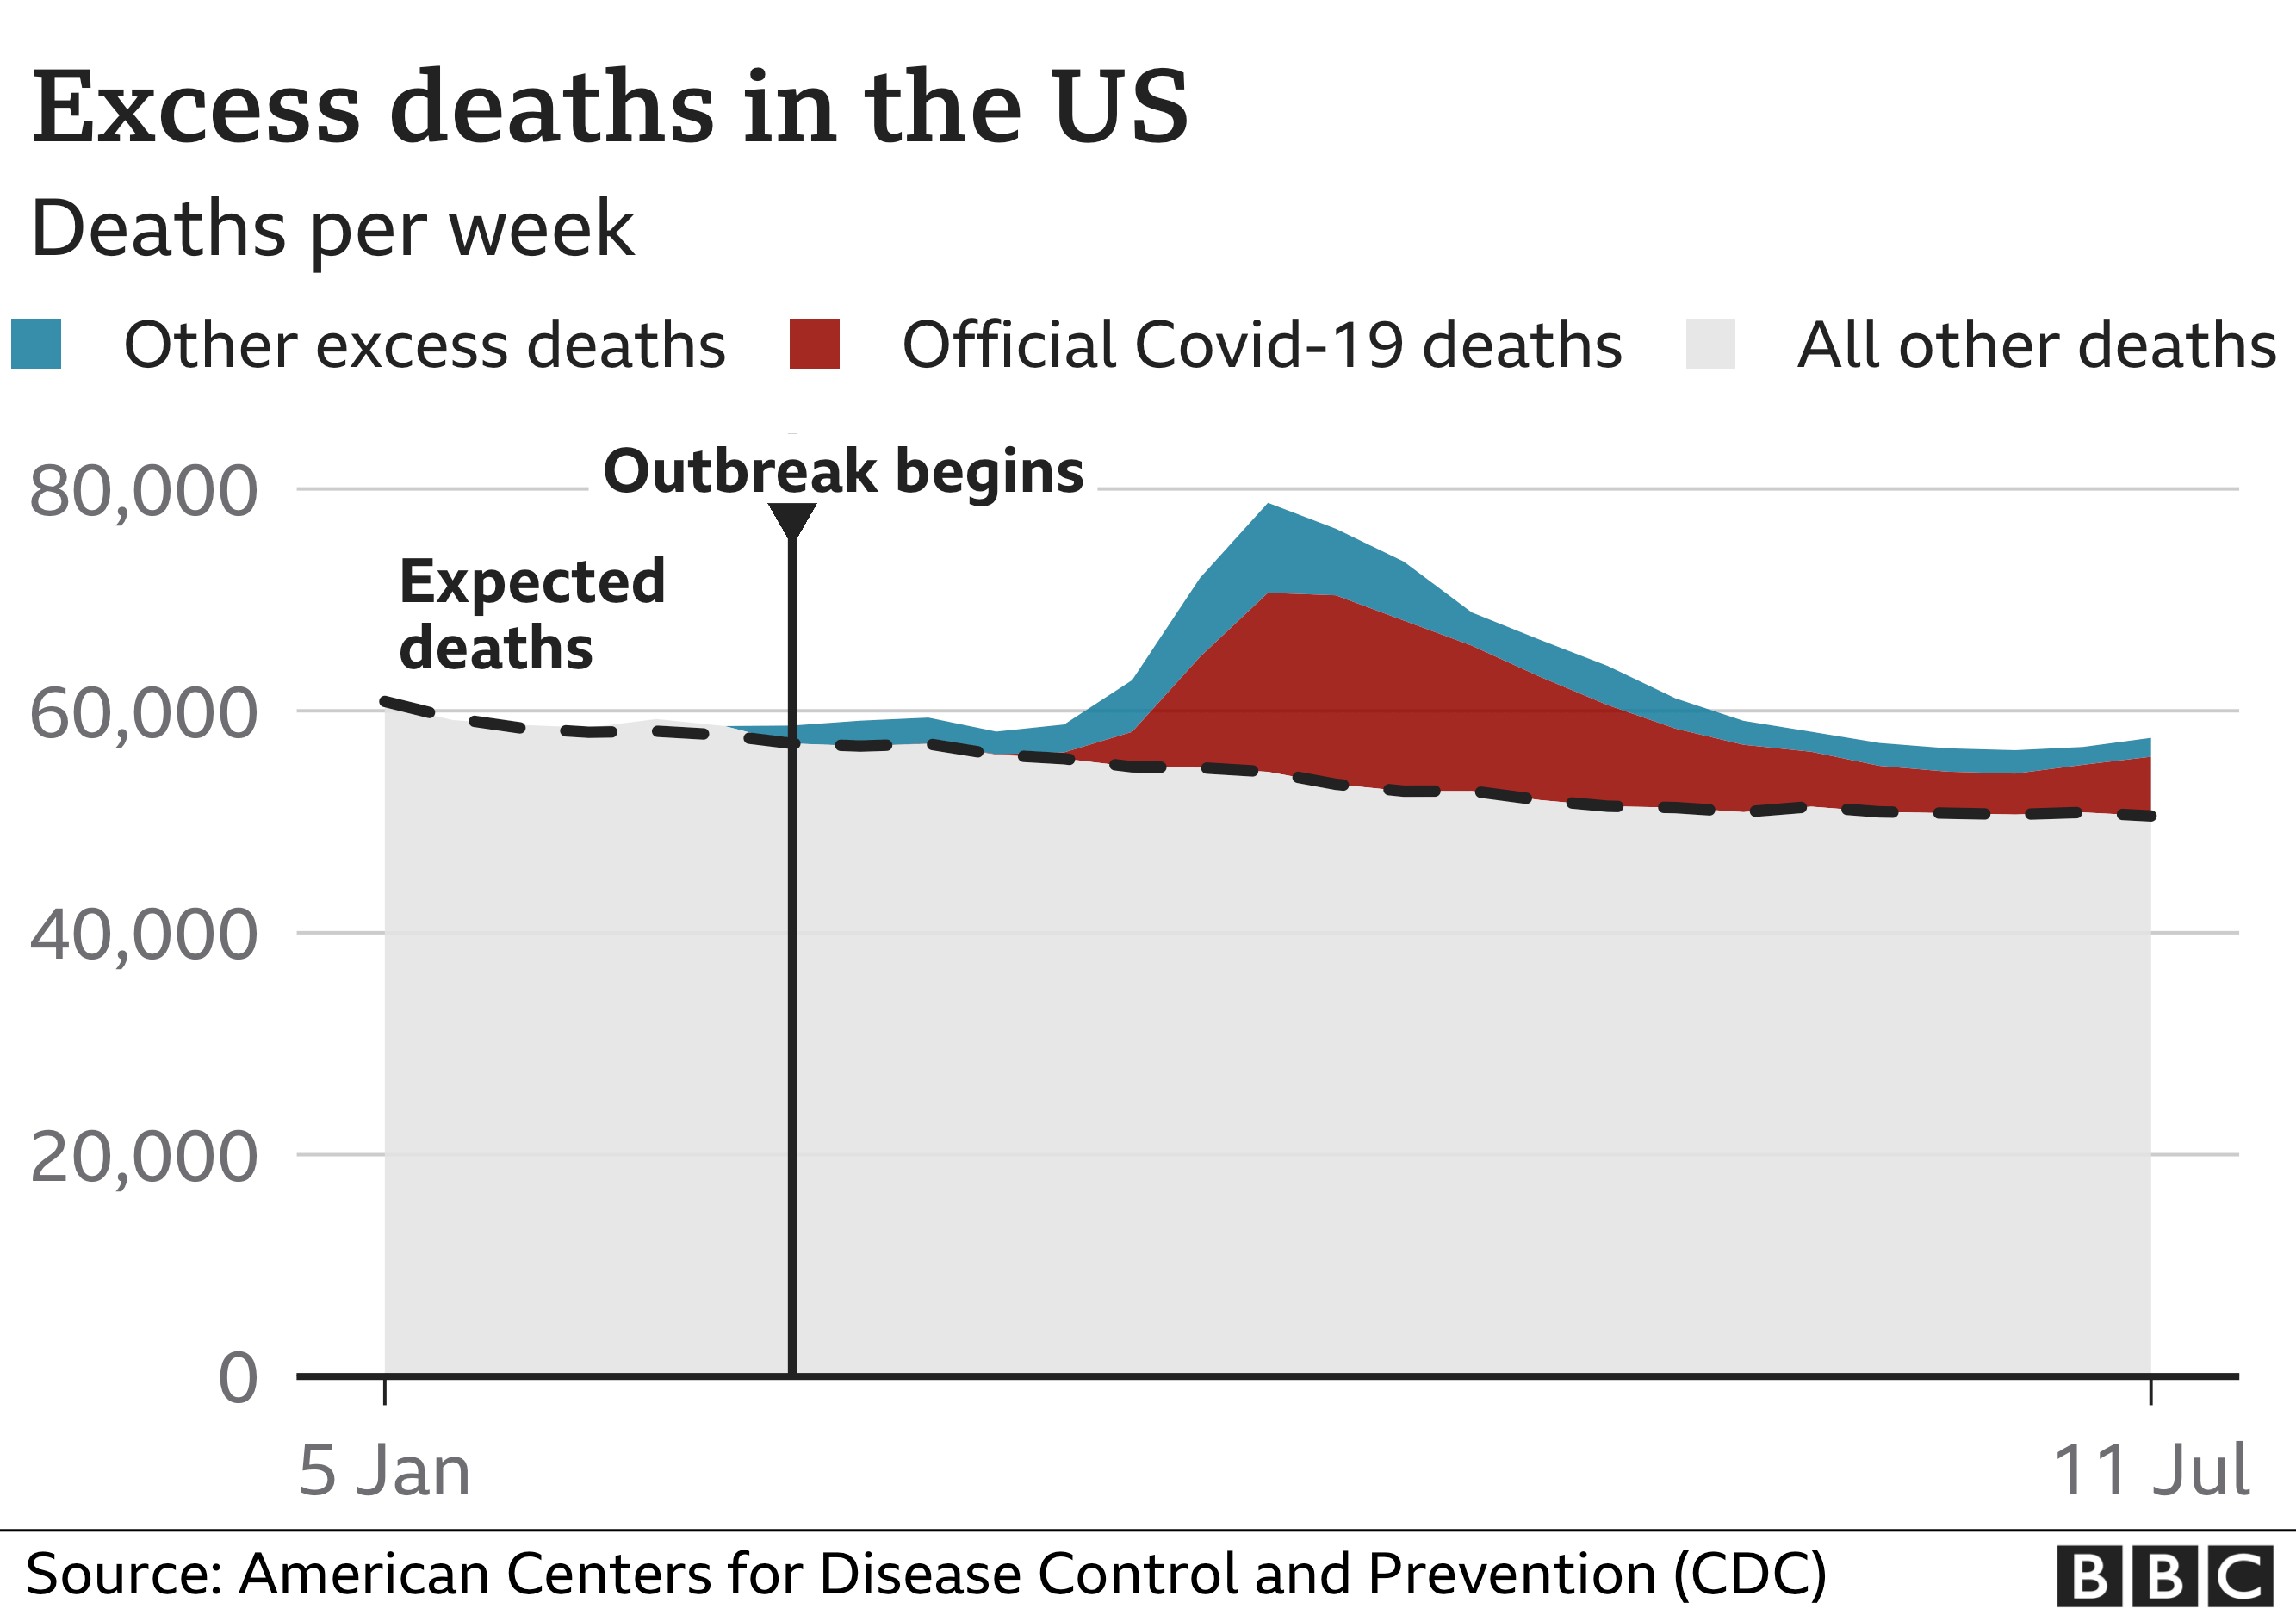 Chart showing excess deaths in the US